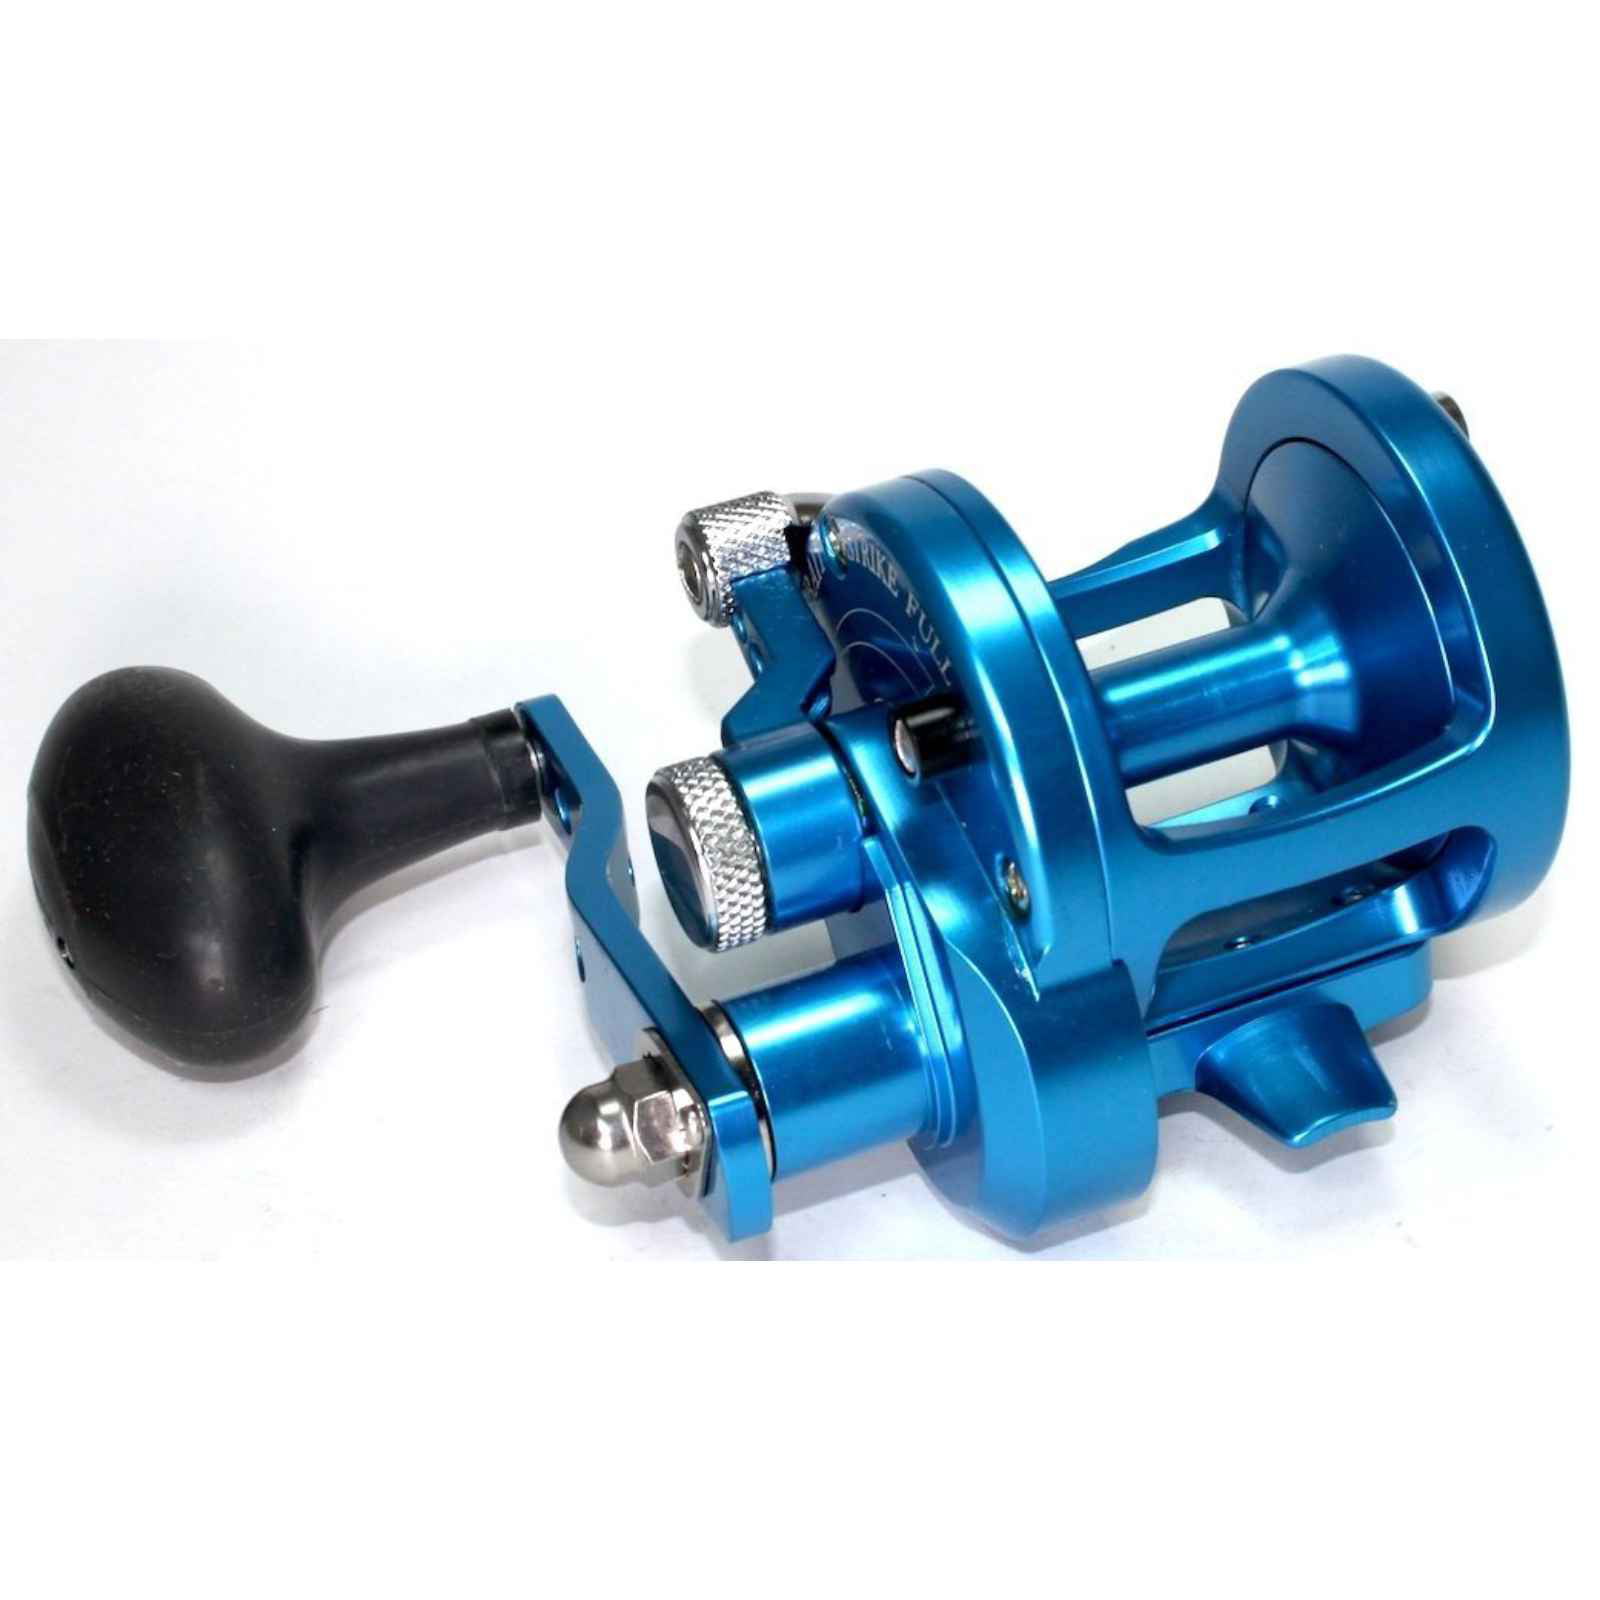 AVET SX 5.3 RH-BL Lever Drag Conventional Reel, Right-Hand, 5.3:1 Ratio,  Blue 